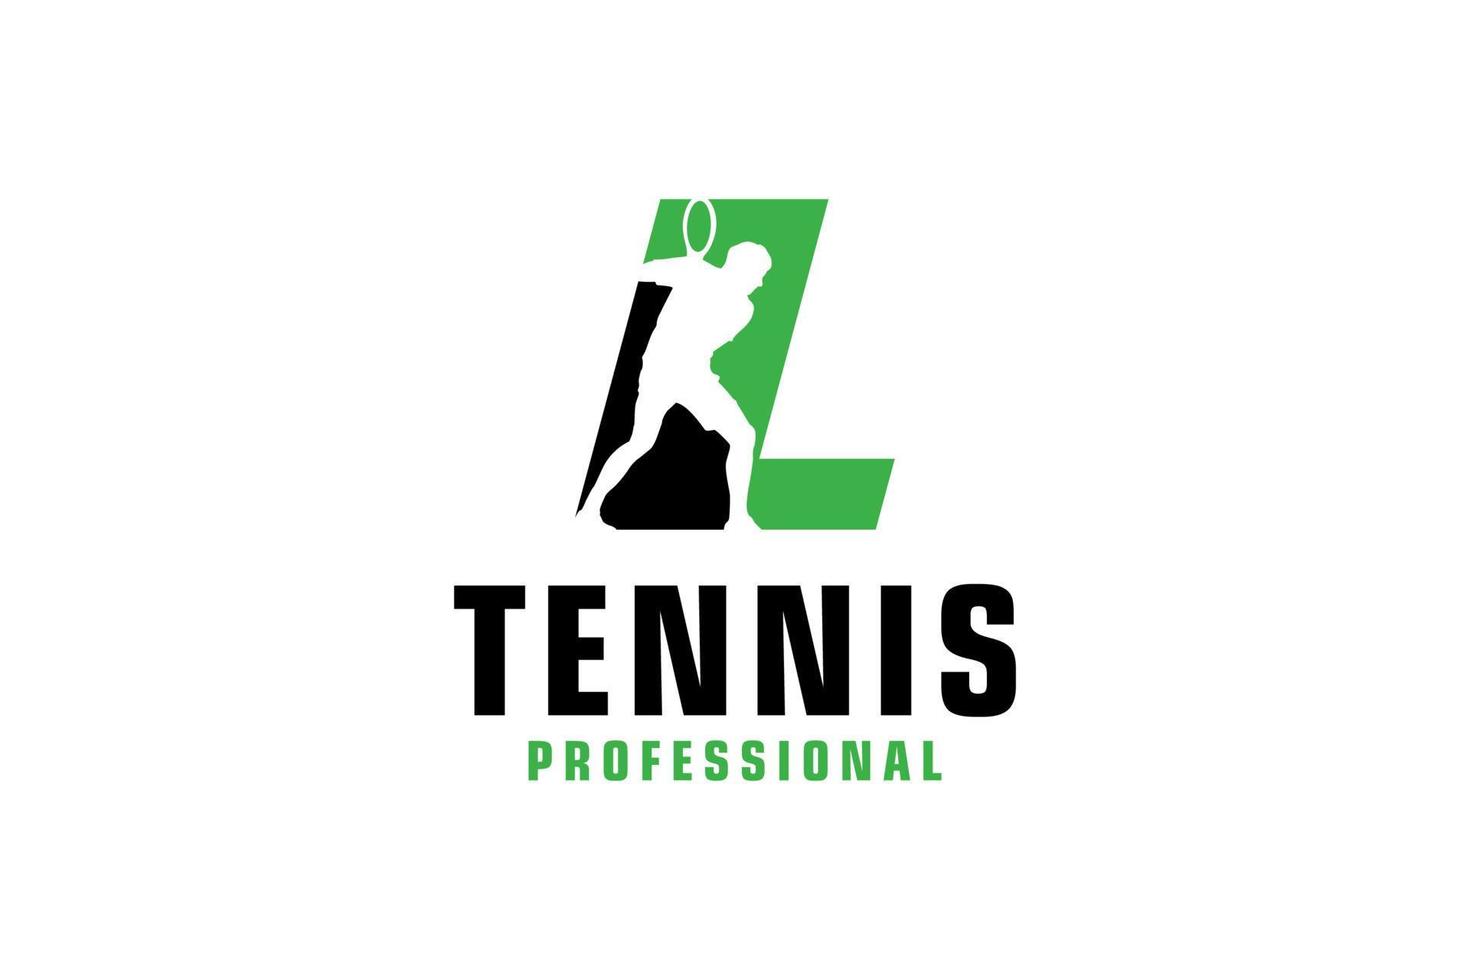 Letter L with Tennis player silhouette Logo Design. Vector Design Template Elements for Sport Team or Corporate Identity.